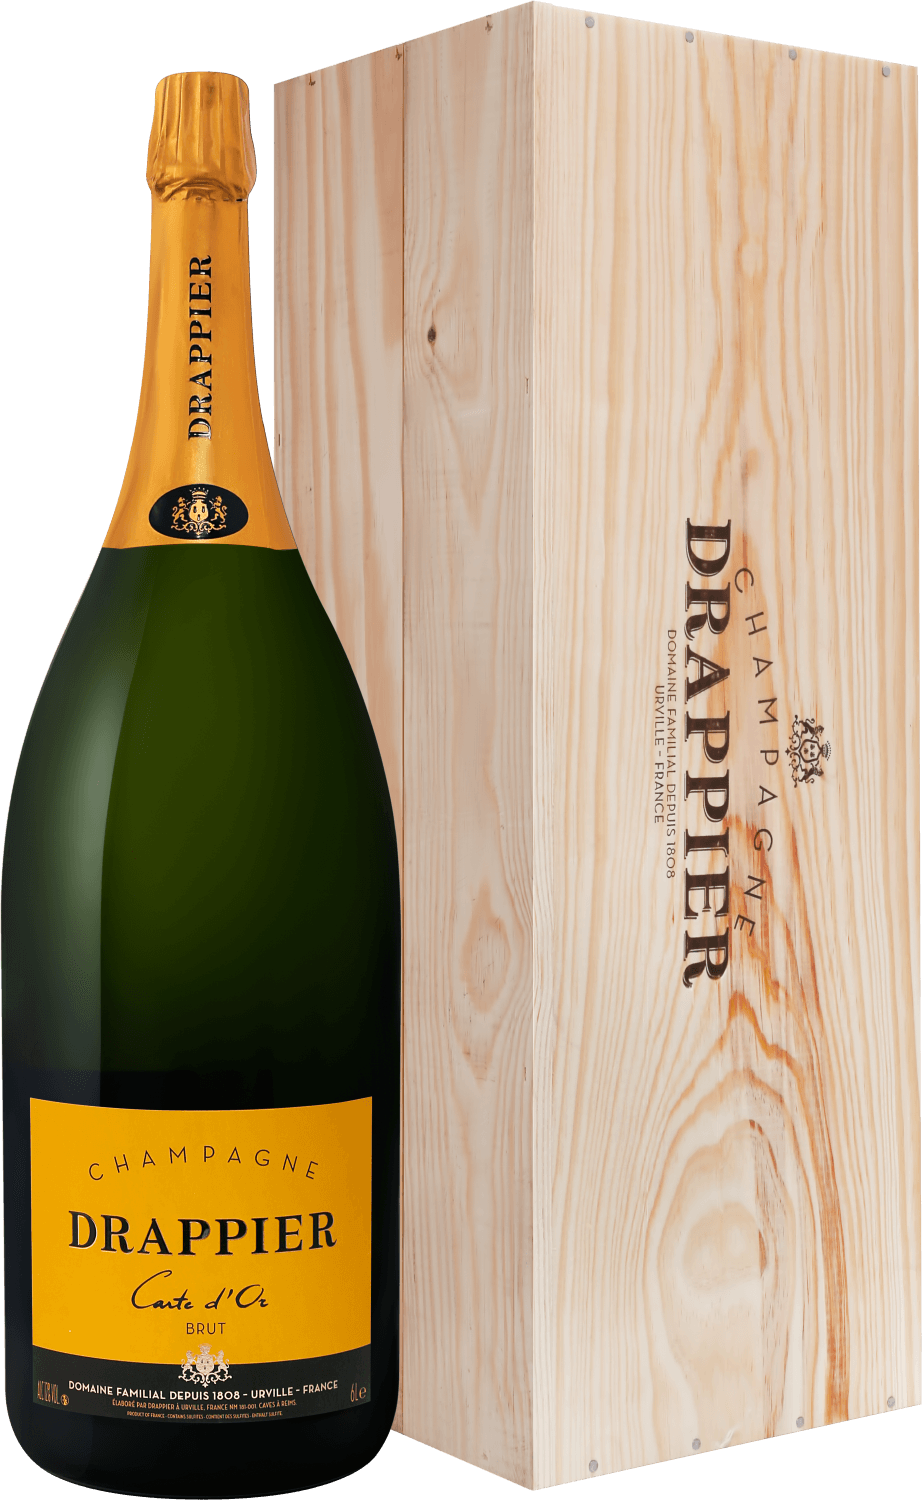 Drappier Carte d’Or Brut Champagne AOP in gift box drappier clarevallis champagne aoc gift box